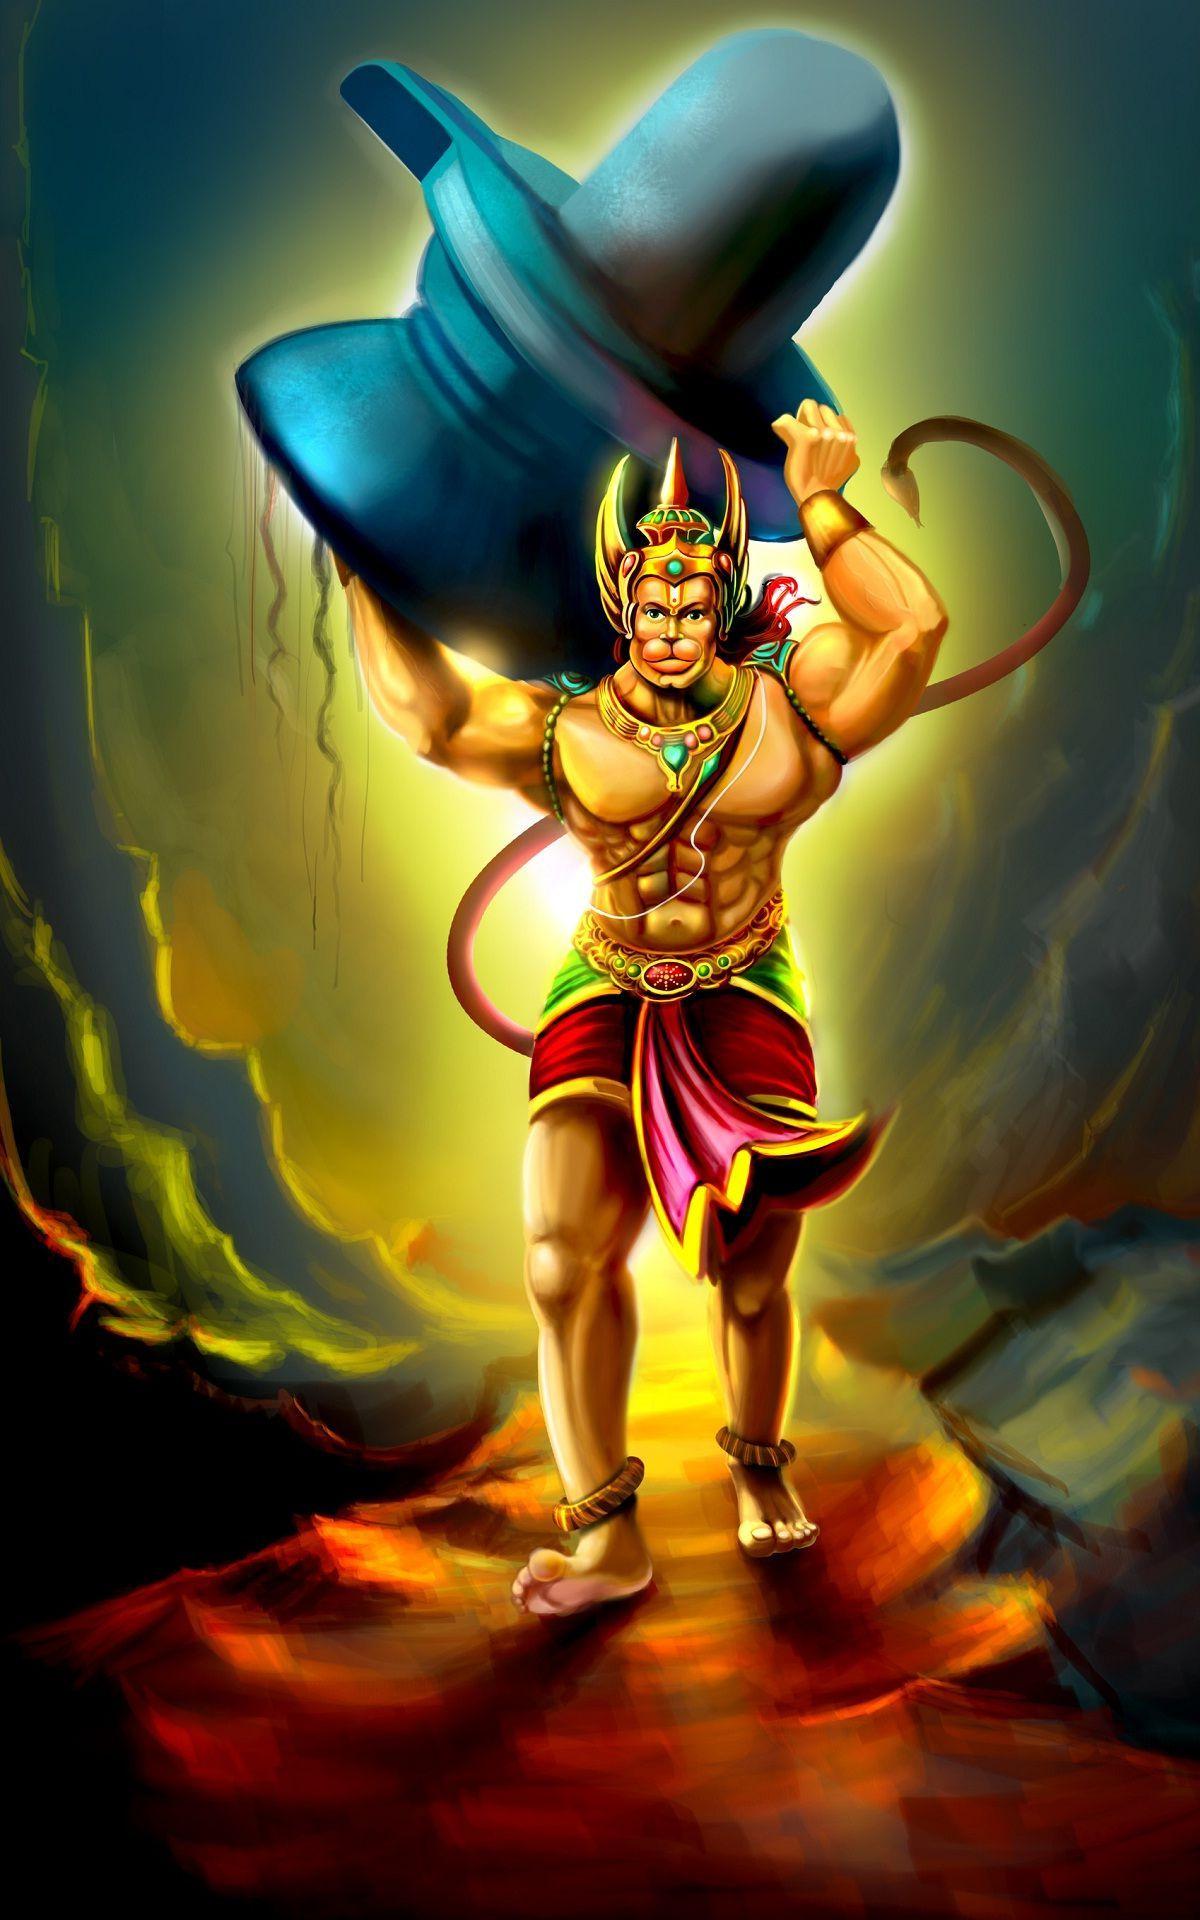 Pin by All In One on drawing  Hanuman wallpaper Lord hanuman wallpapers  Hanuman hd wallpaper